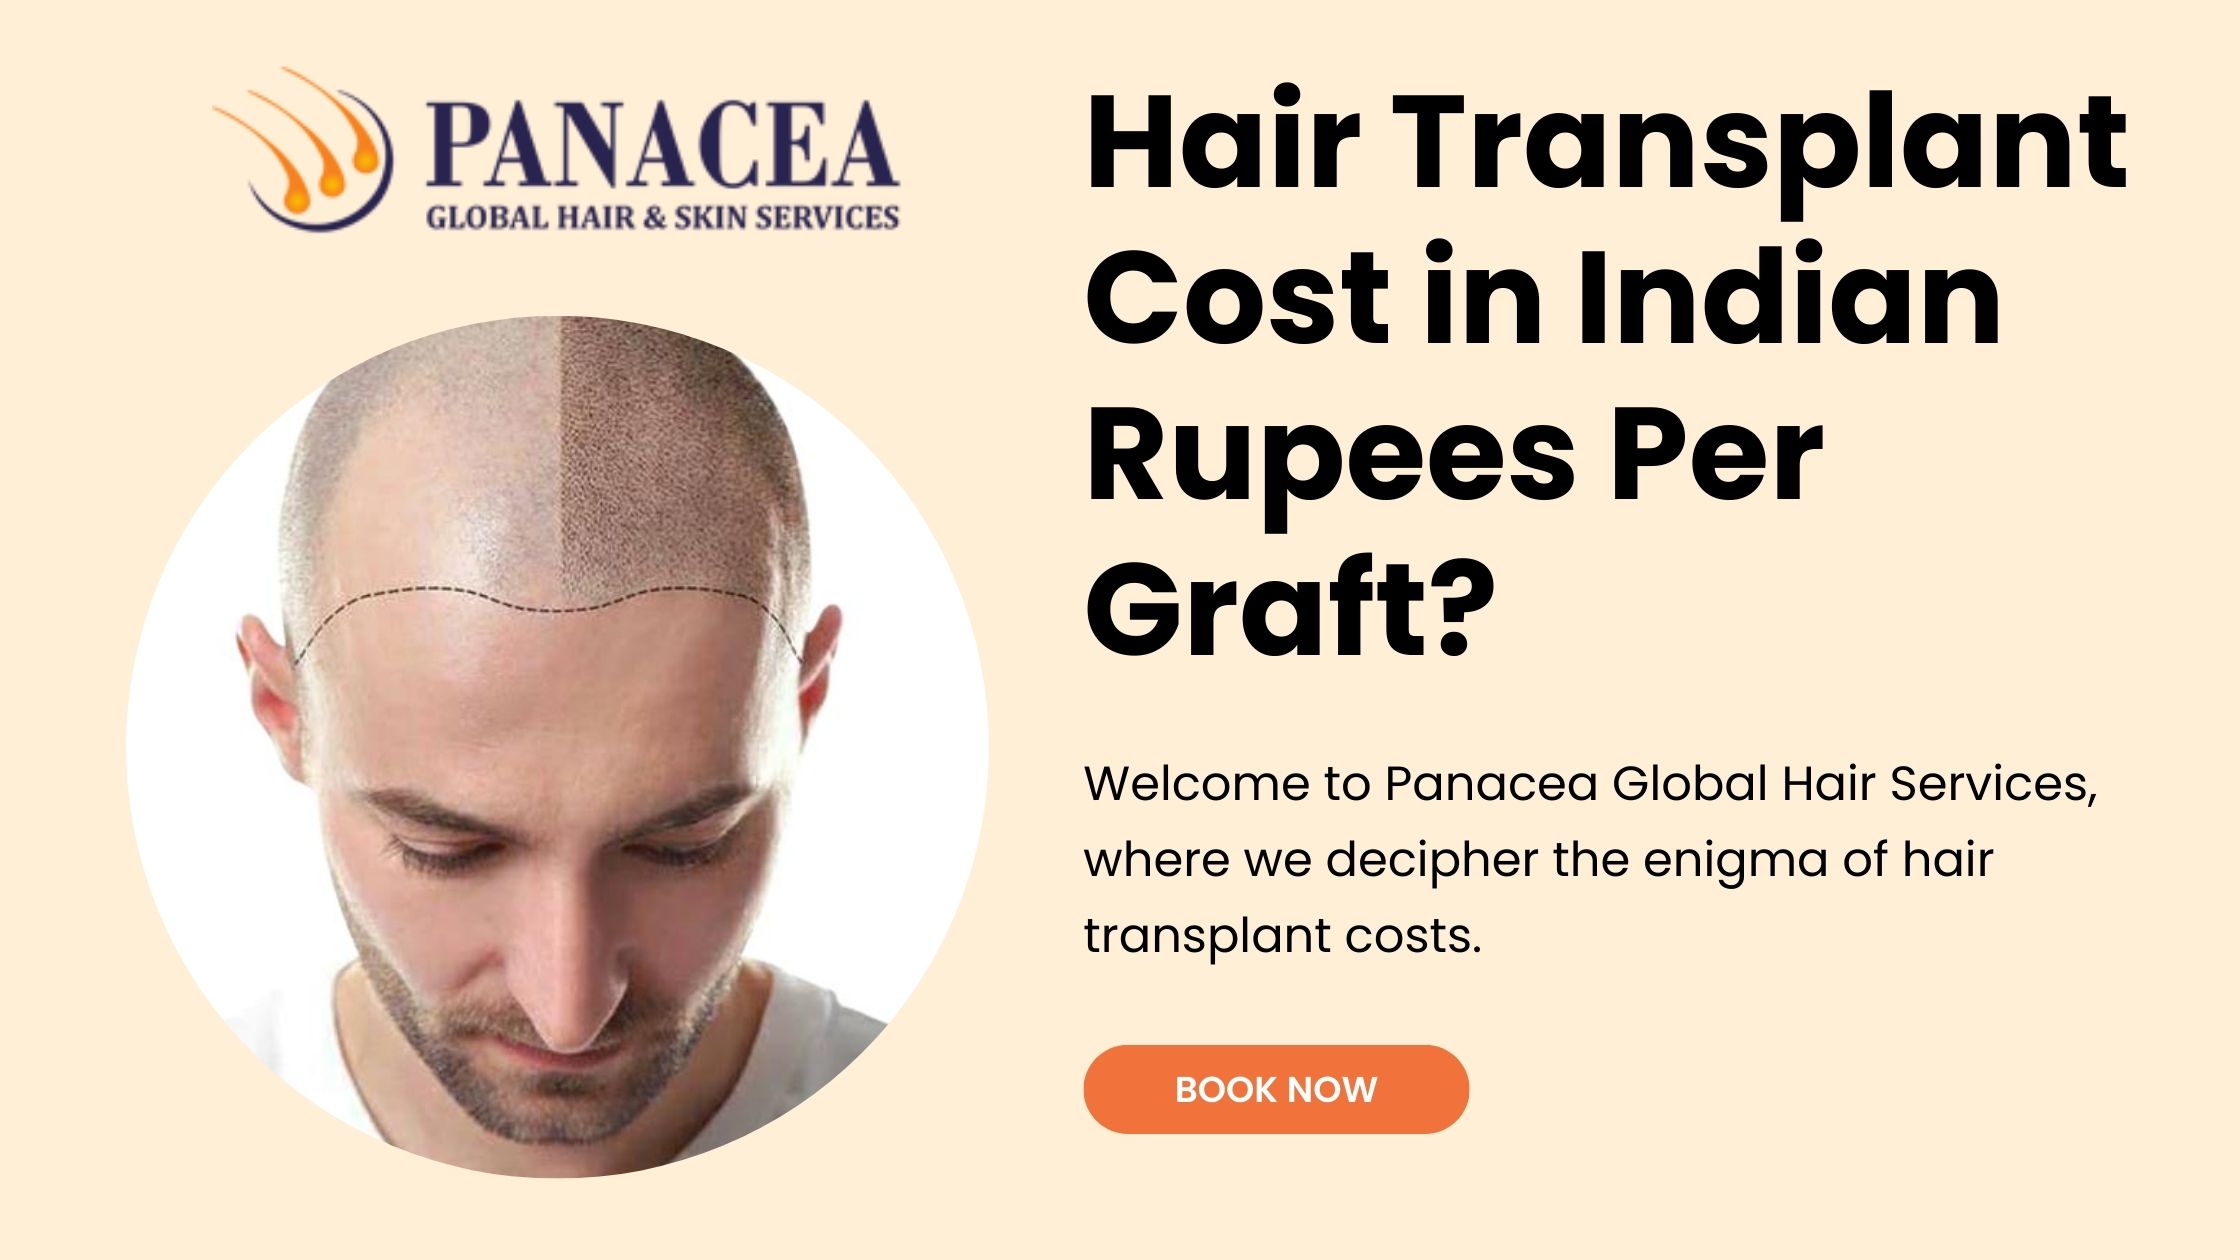 What Is The Hair Transplant Cost in Indian Rupees Per Graft